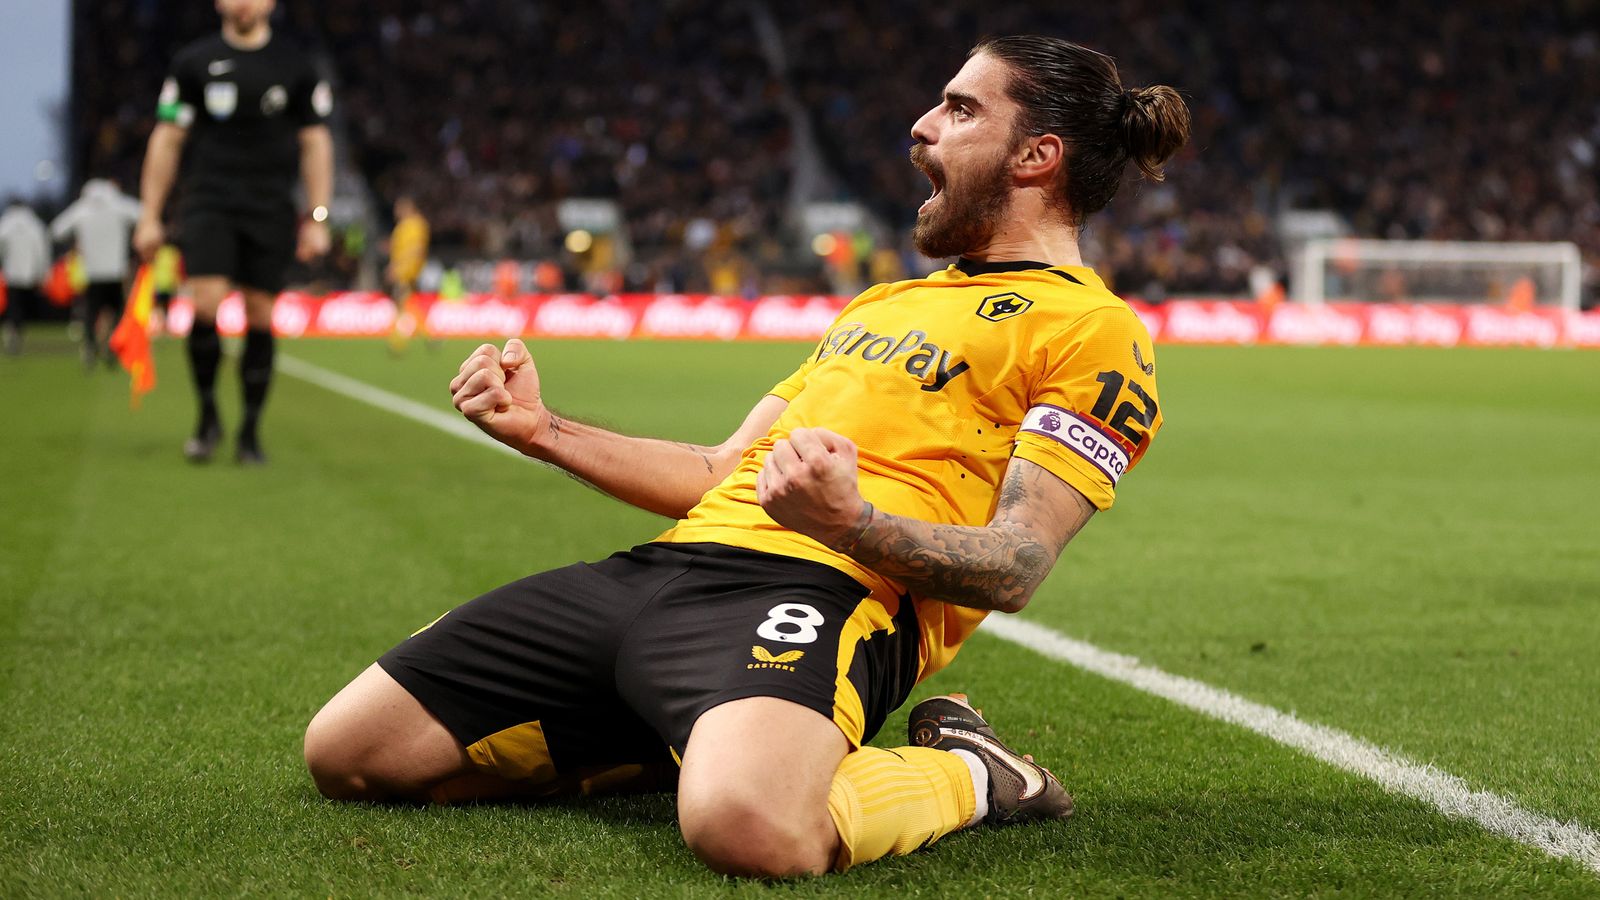 Ruben Neves has confirmed to join Al Hilal in a 55m euro (£47m) deal from Wolves.